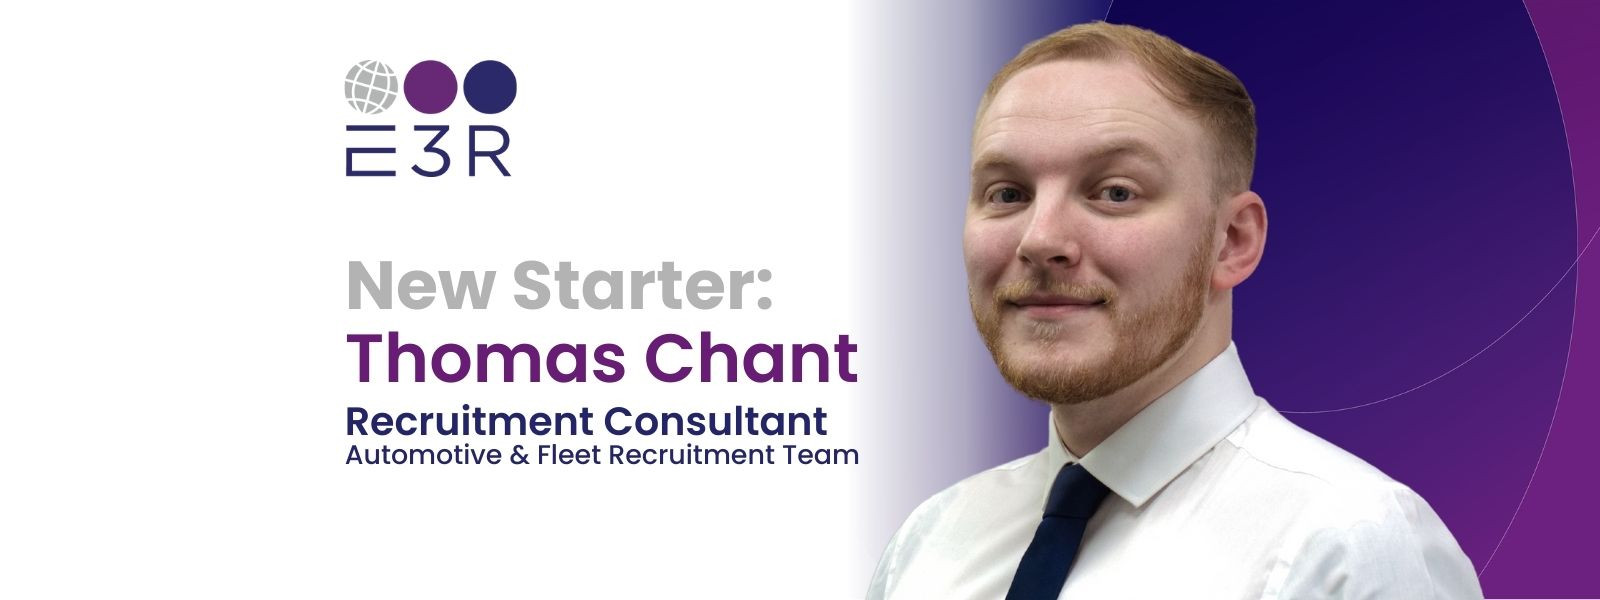 Meet Thomas Chant, Recruitment Consultant in the A...